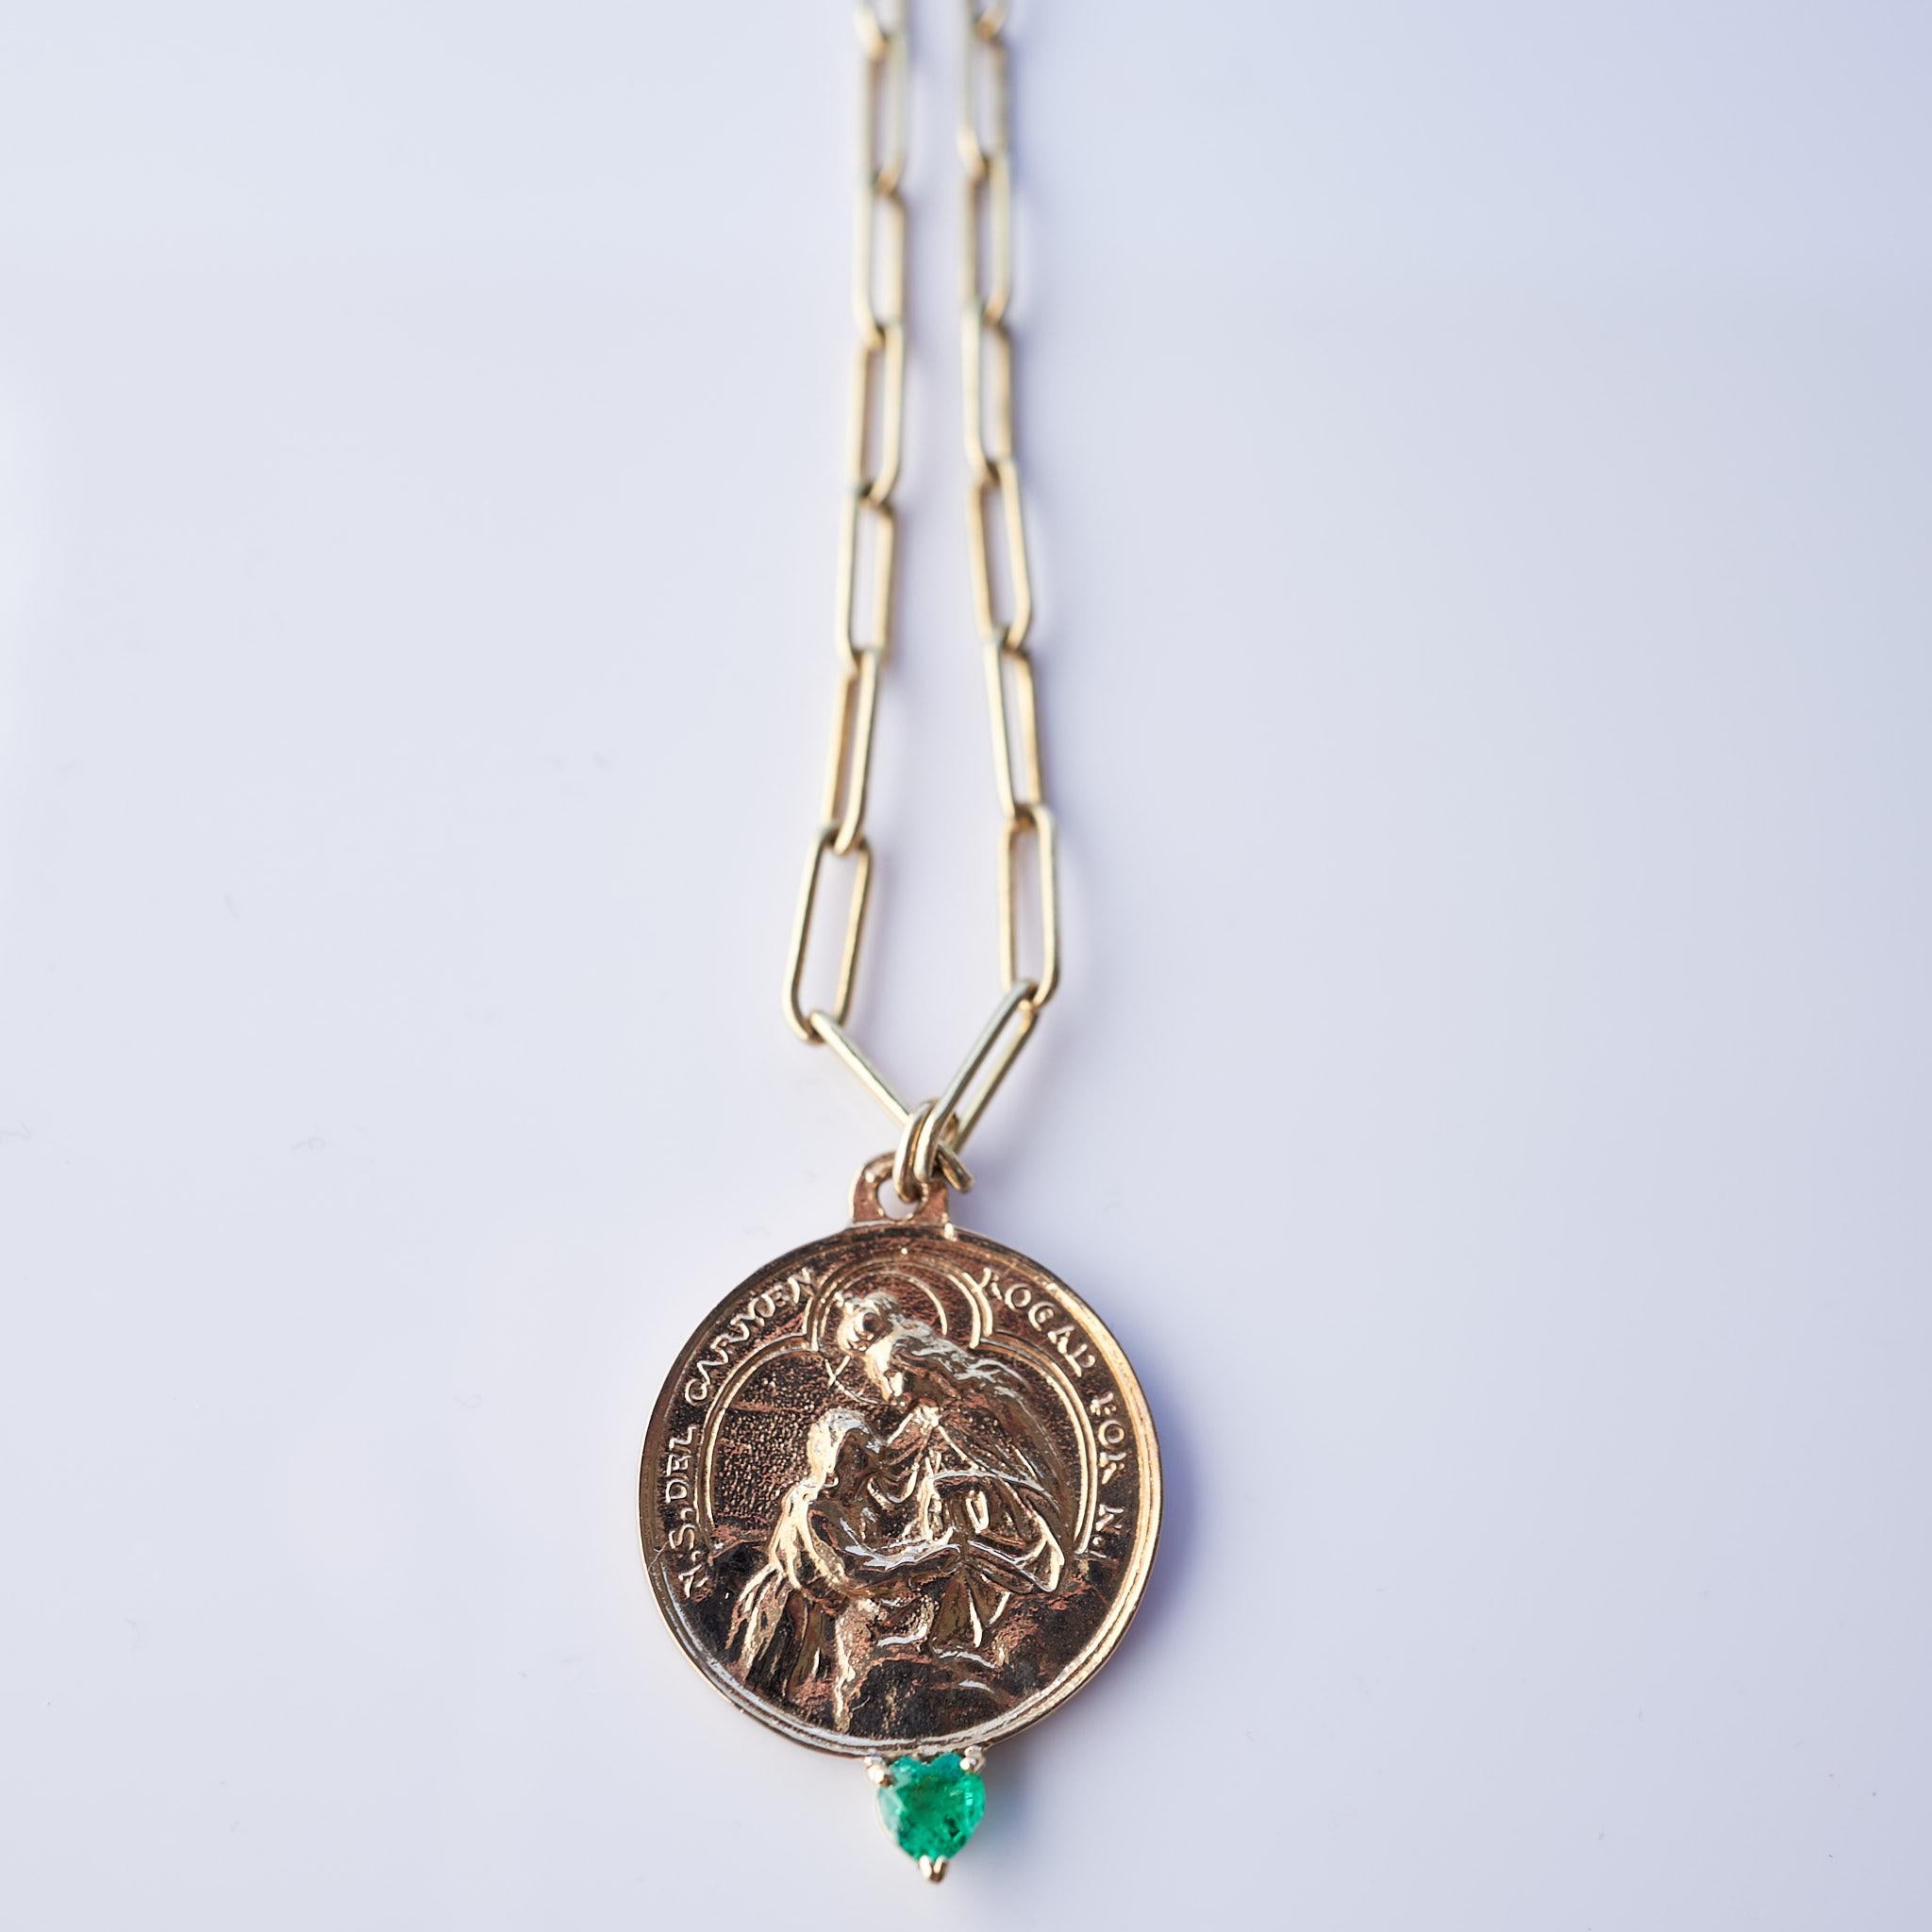 Emerald Heart Bronze Medal Necklace Chain Virgin Mary Pendant  28